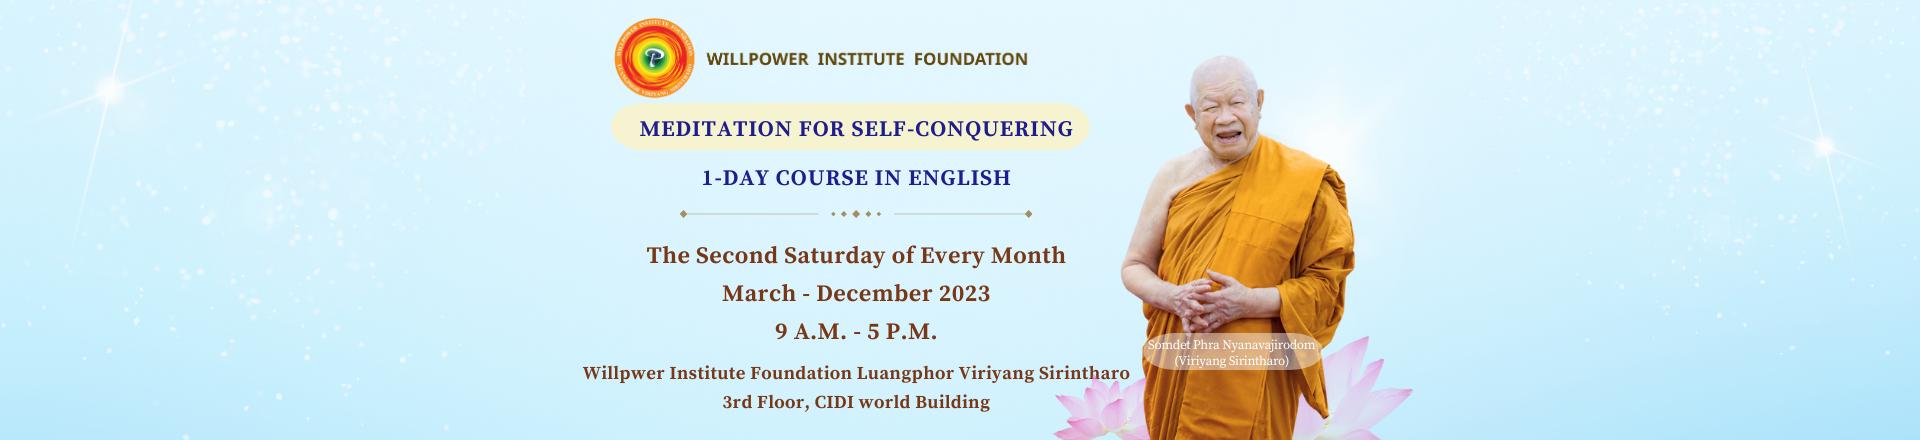 The Willpower Institute is offering a one-day English meditation course, Meditation for Self-Conquering (MSC).